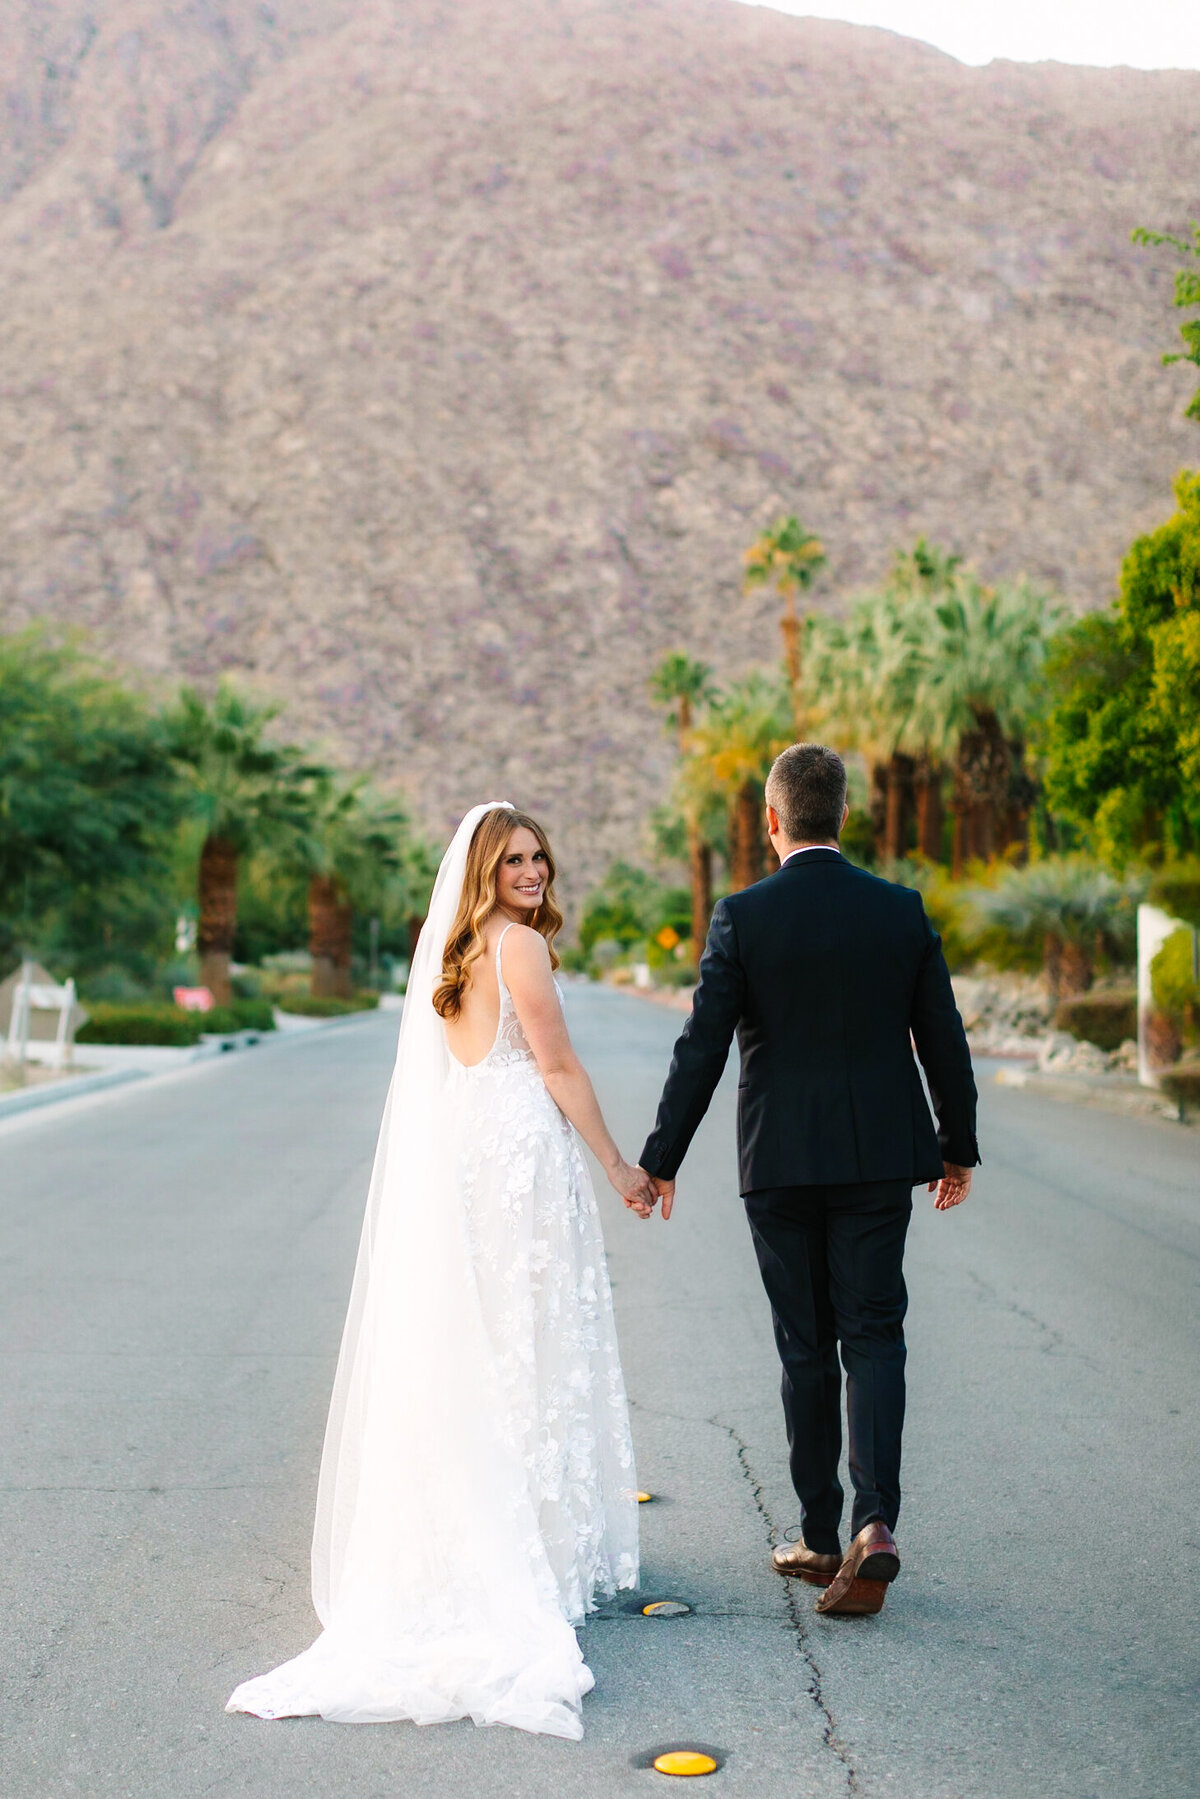 Bride and groom portraits for a fall wedding at the Avalon Palm Springs in Palm Springs, CA